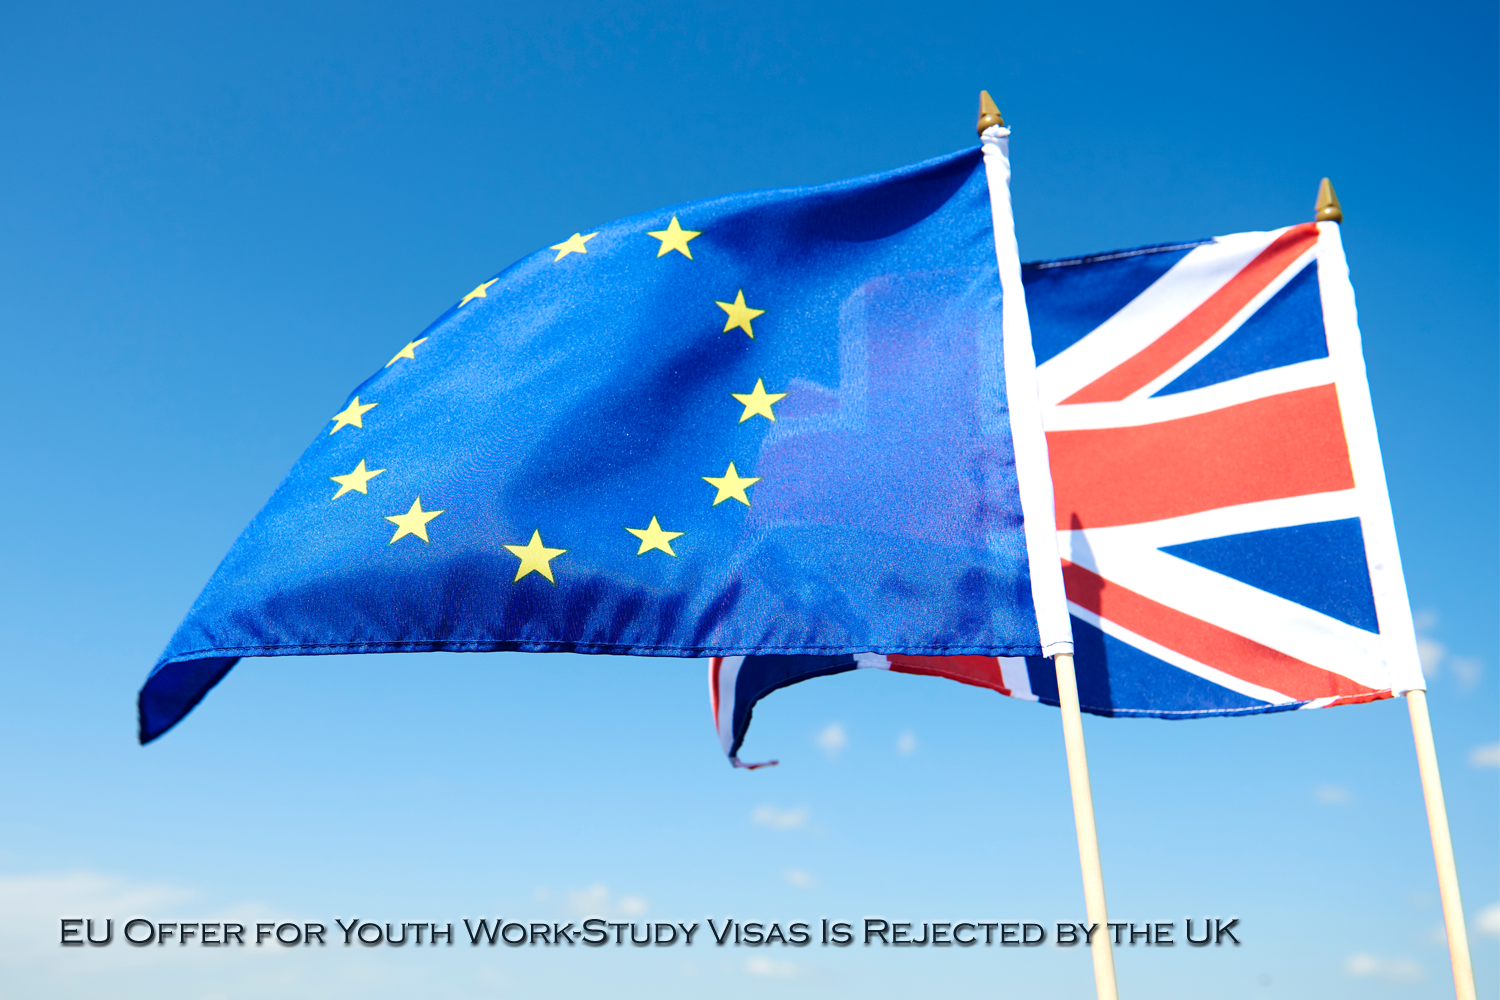 EU Offer for Youth Work-Study Visas Is Rejected by the UK.